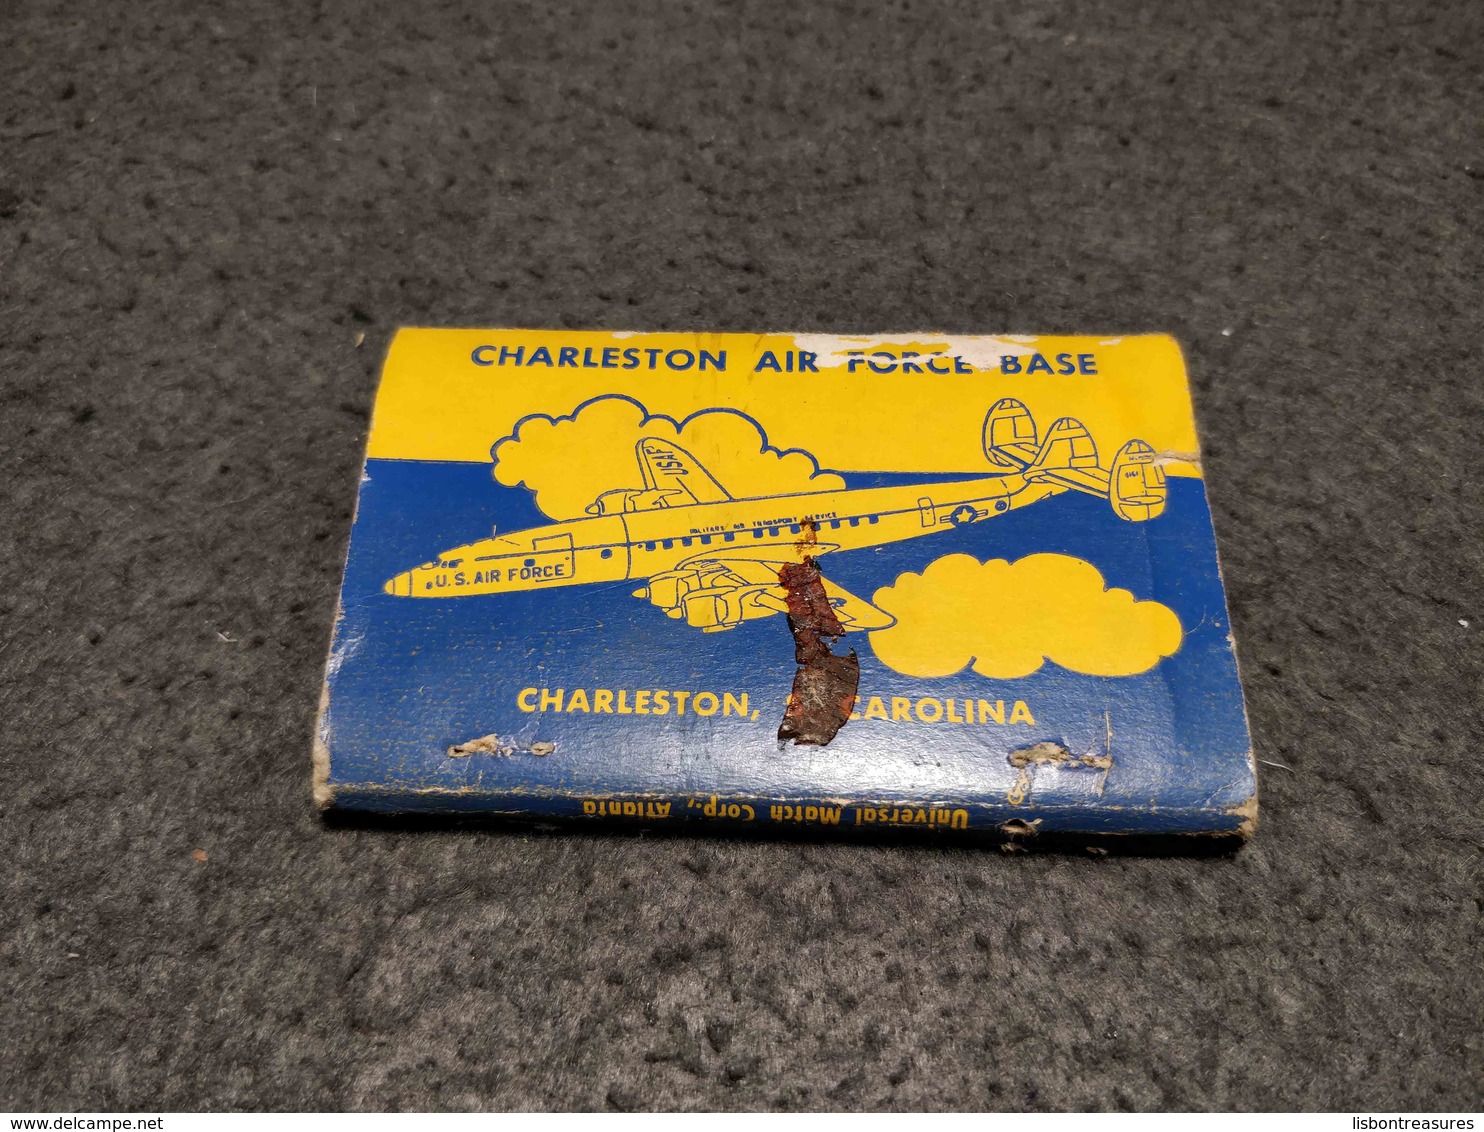 ANTIQUE MATCHBOX MATCHES LABEL ADVERTISING CHARLESTON AIR FORCE BASE MILITARY UNITED STATES - Matchboxes